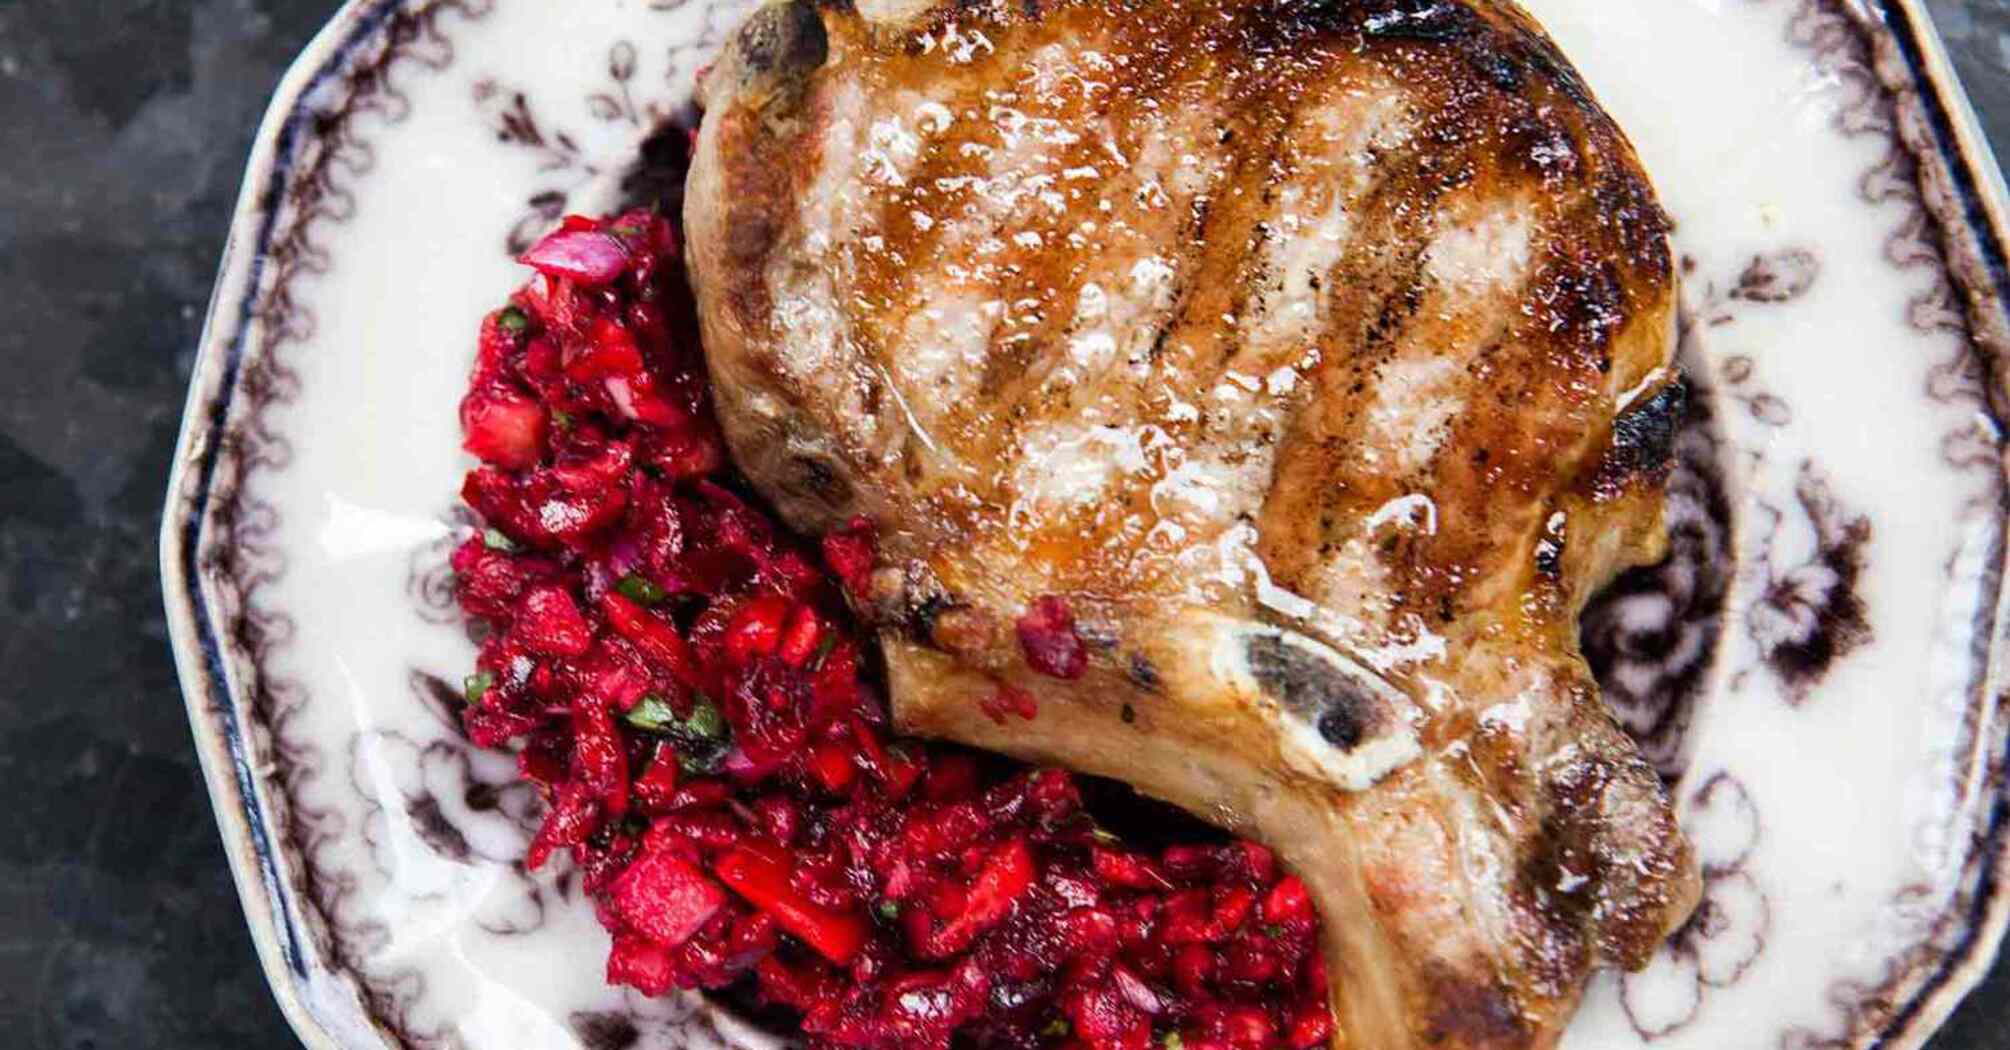 How to cook grilled pork chops with cherry salsa